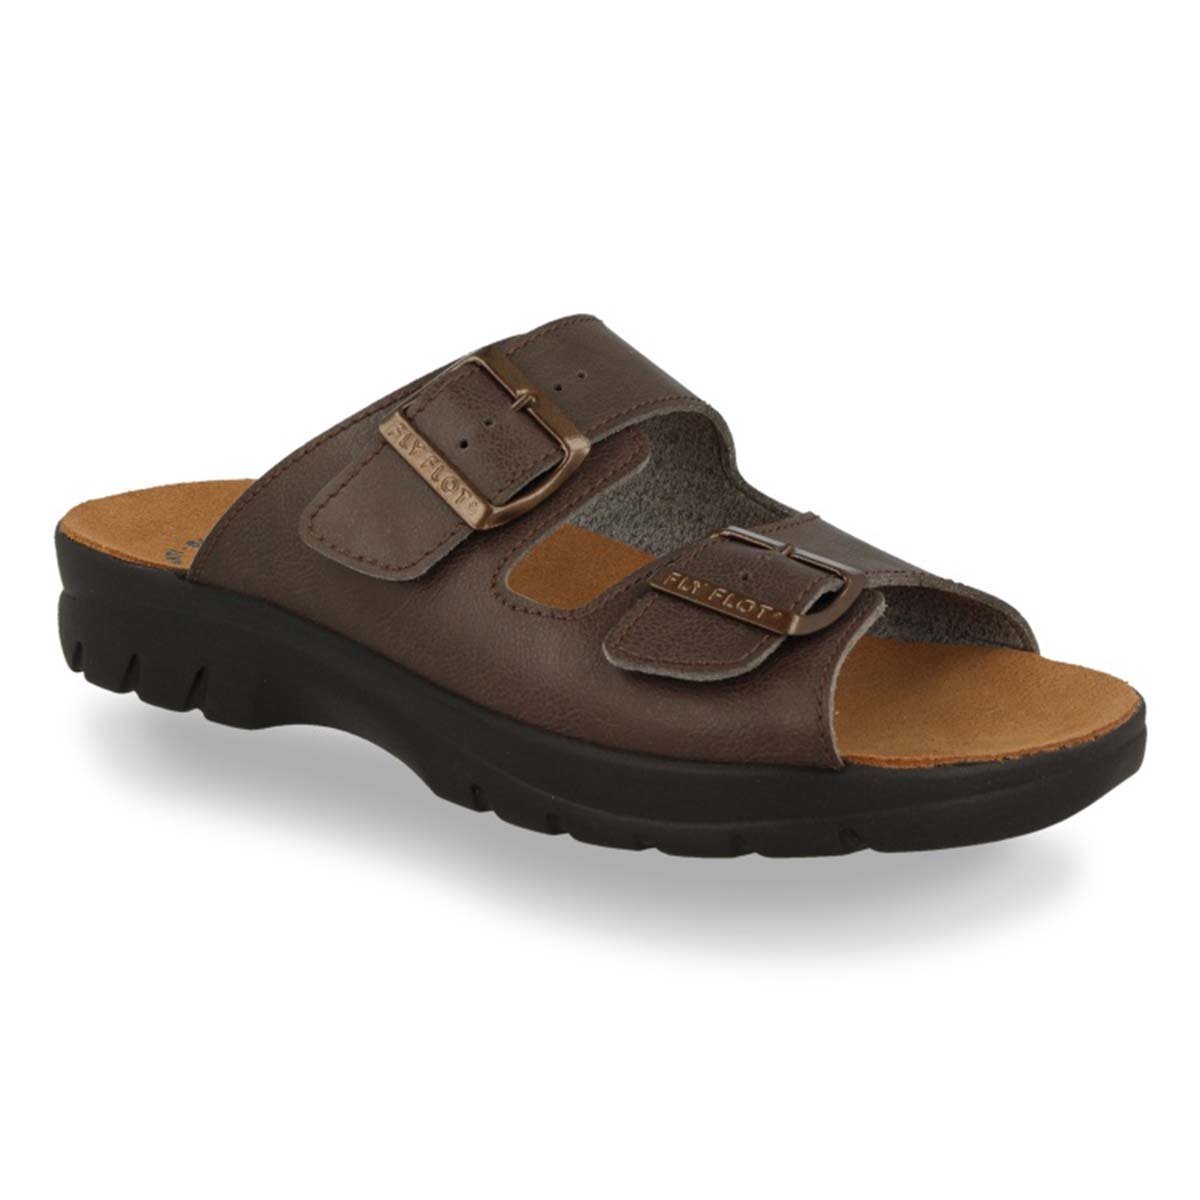 See the Brown Leather  Double Strap Slide Men Sandals in the colour BROWN, available in various sizes